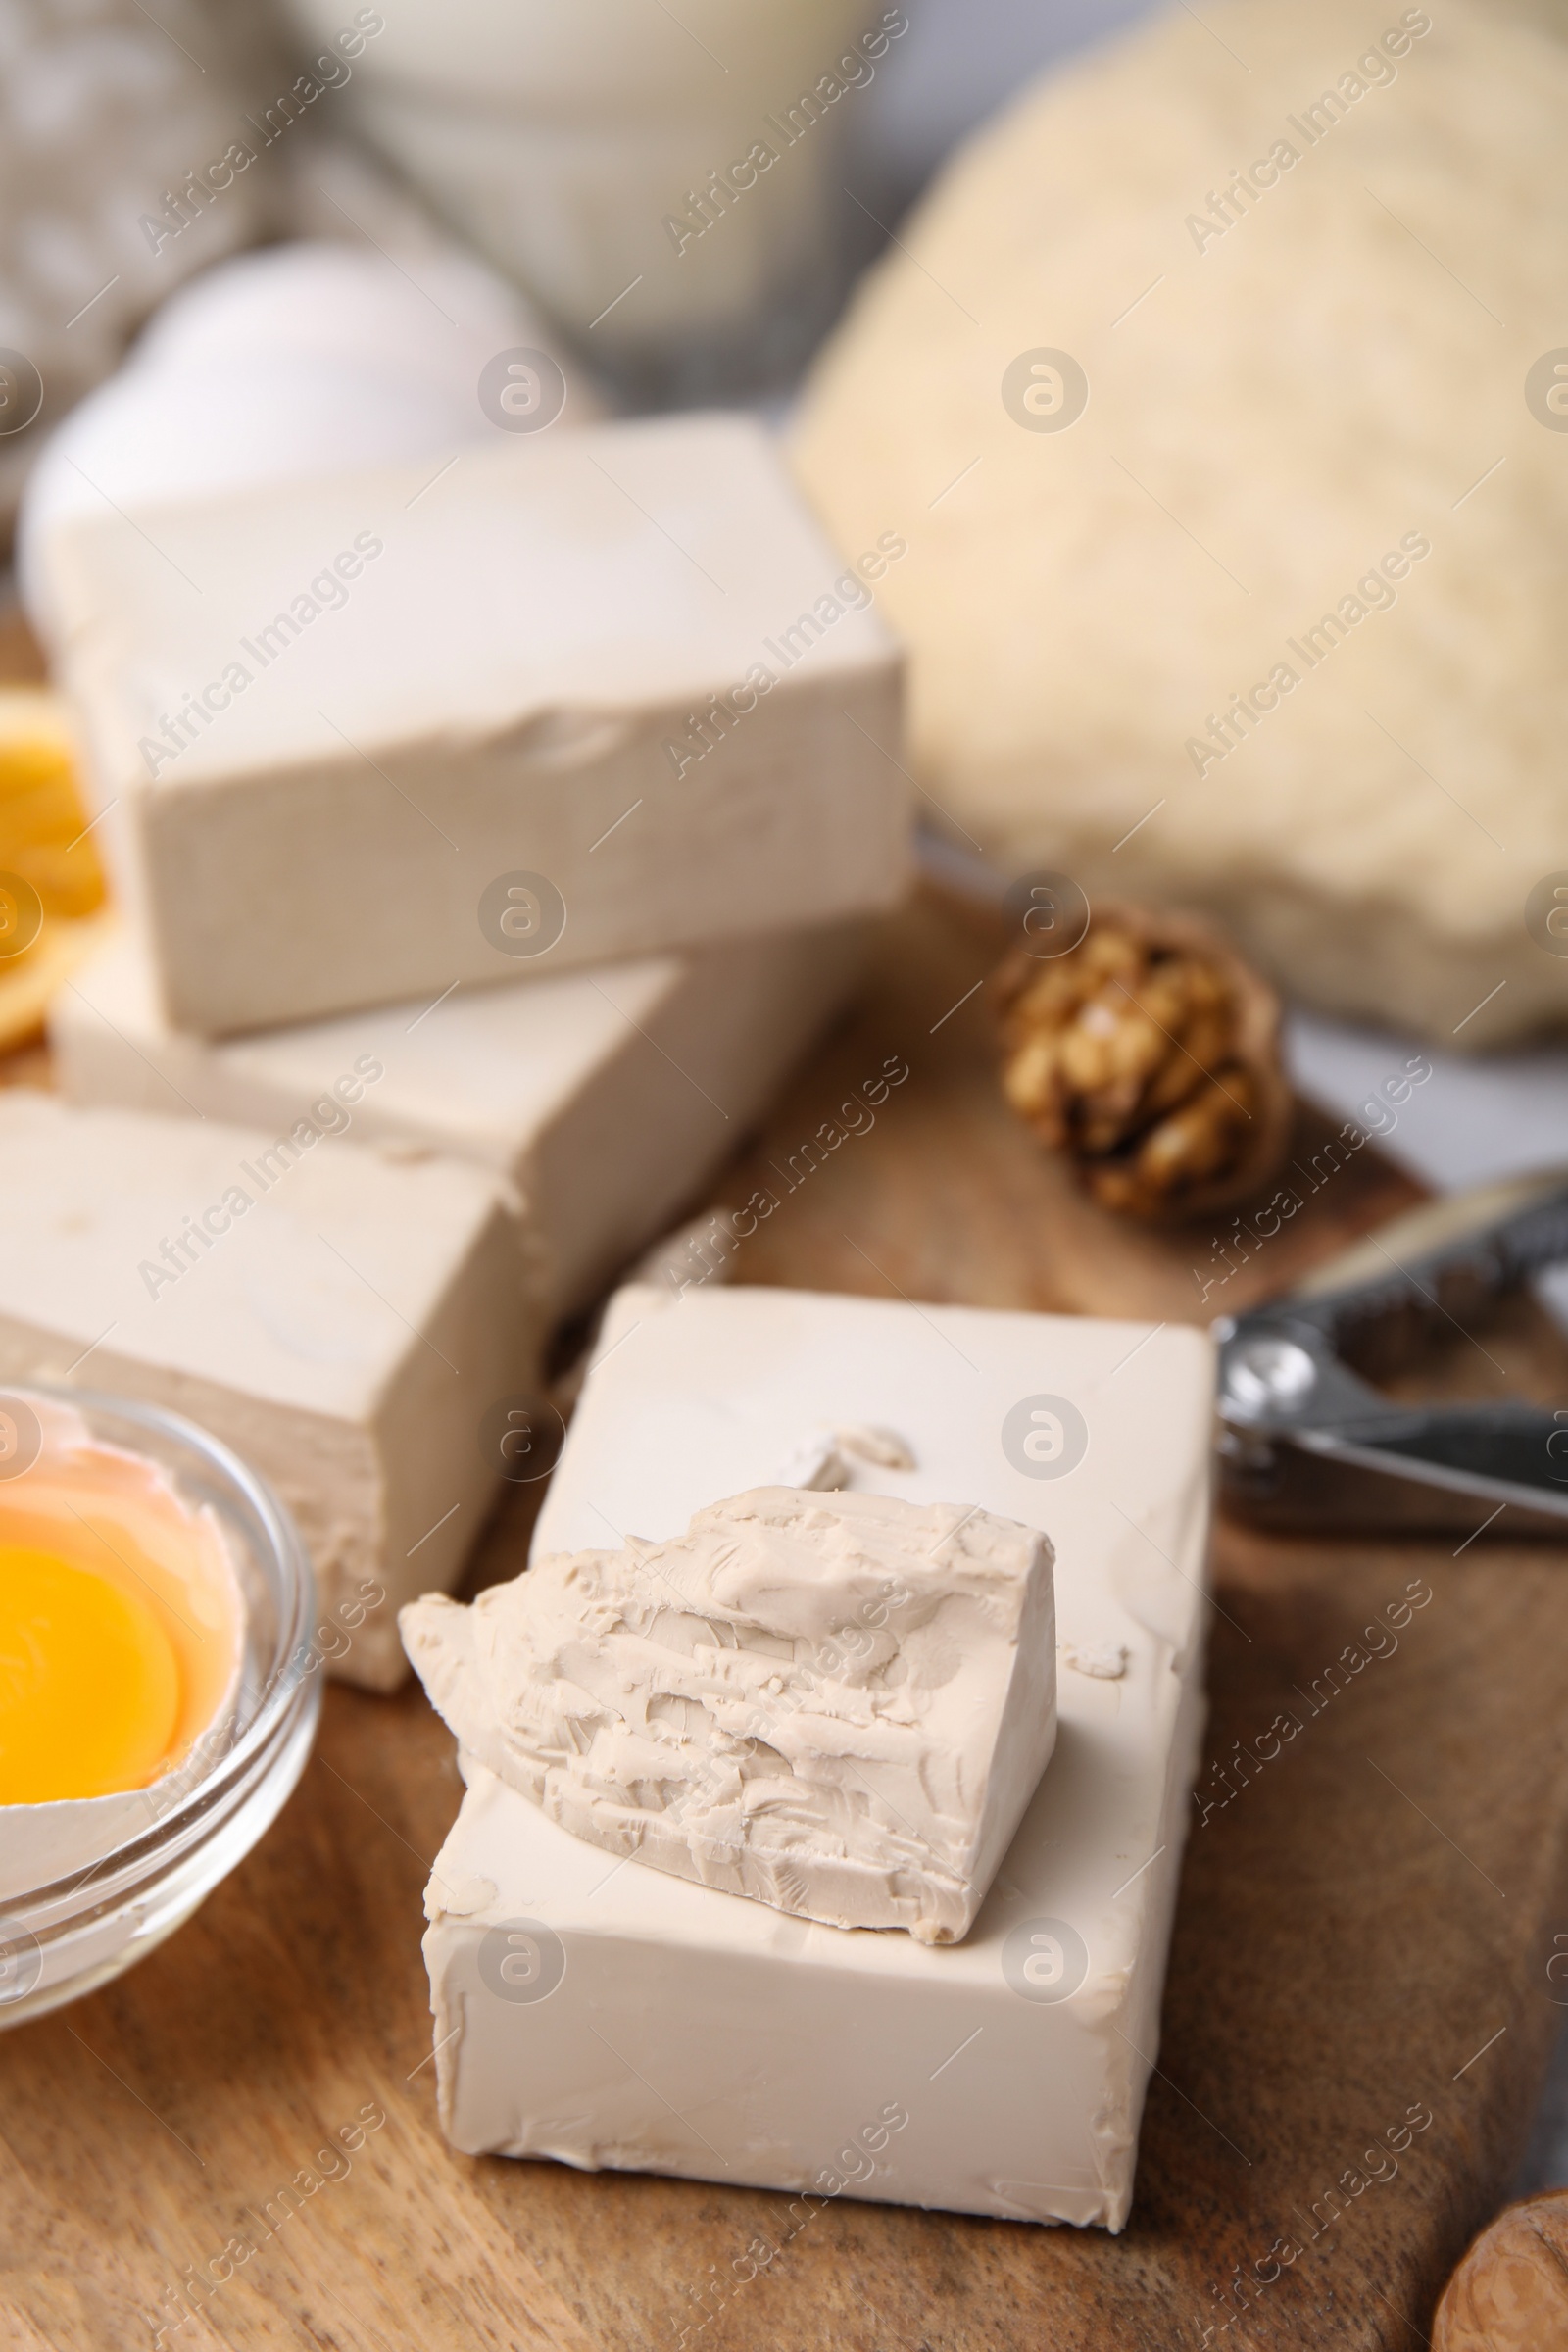 Photo of Blocks of compressed yeast and ingredients for dough on wooden table